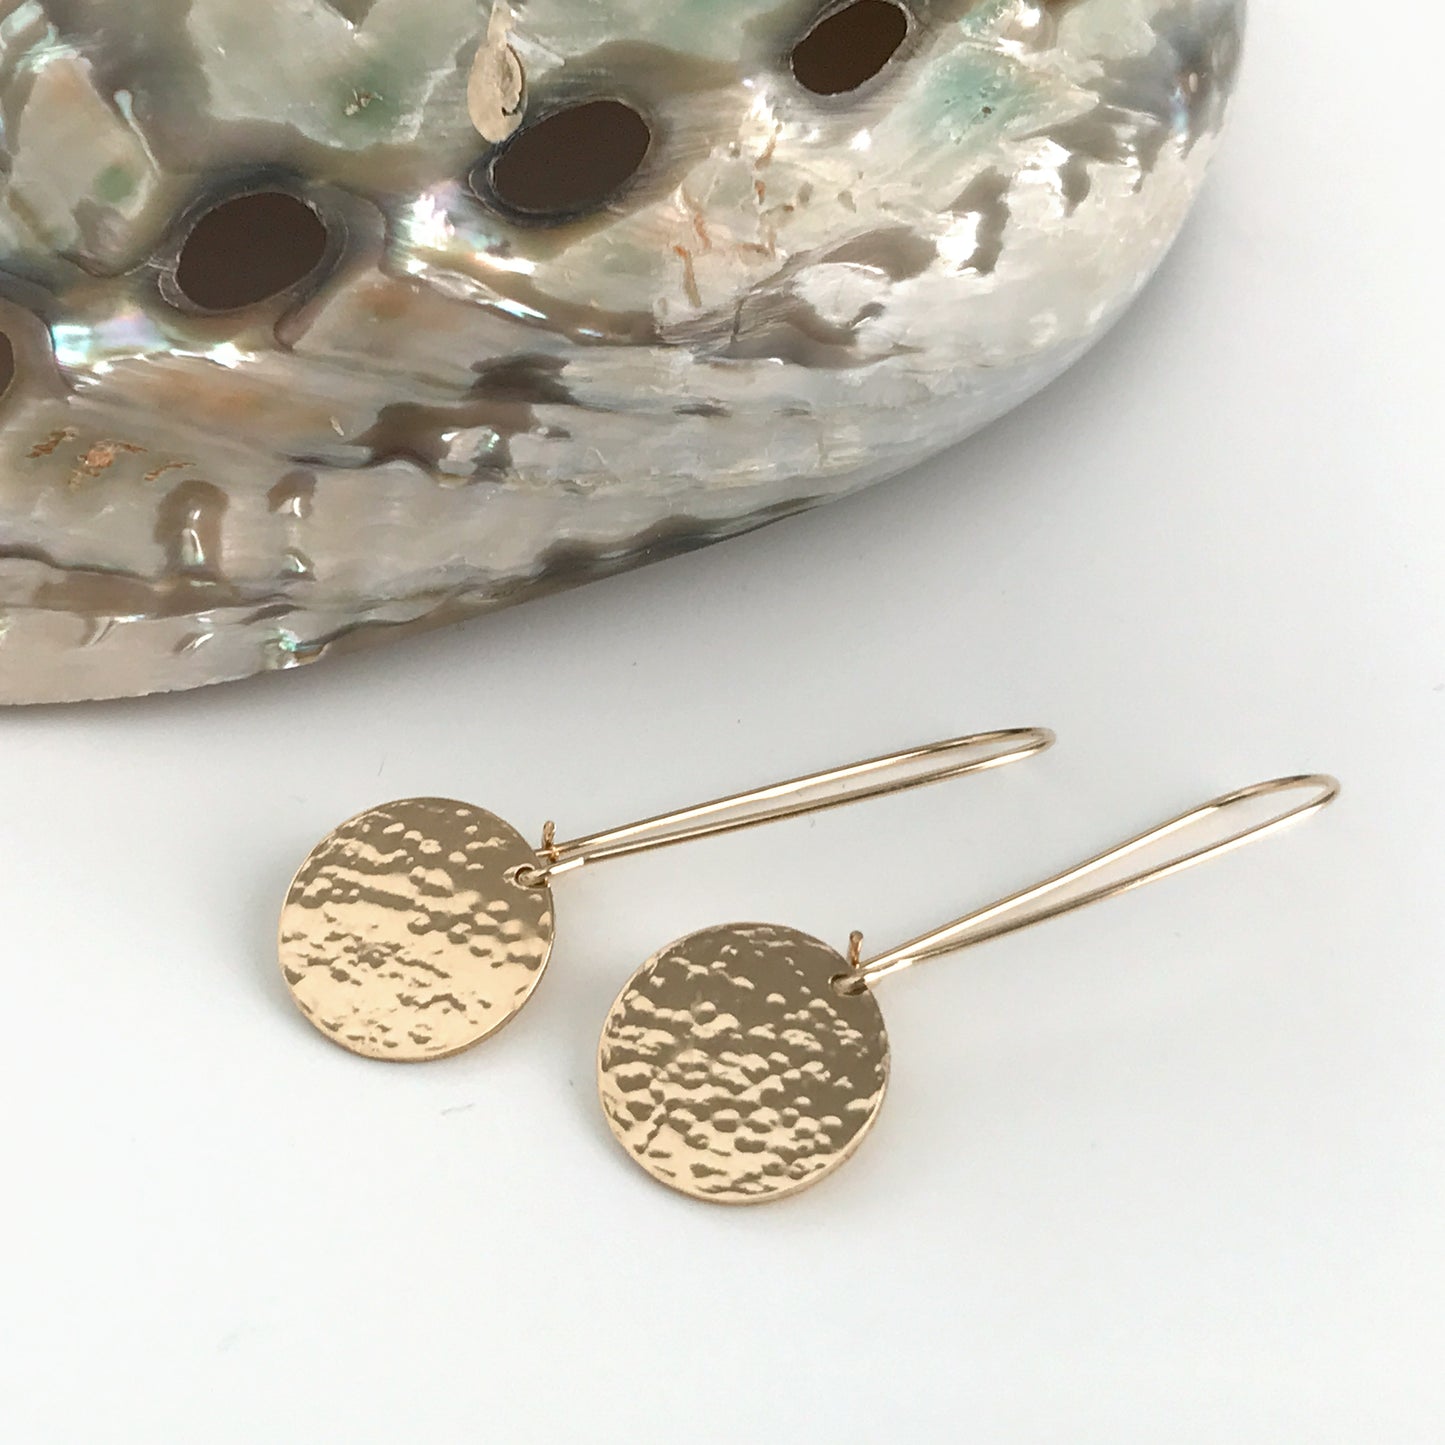 Buy Hammered Gold Earrings, Small Gold Disc Earrings, Tiny Gold Dot Earrings  Dainty Minimalist Jewellery Handmade Love Gift for Her by Blissaria Online  in India - Etsy